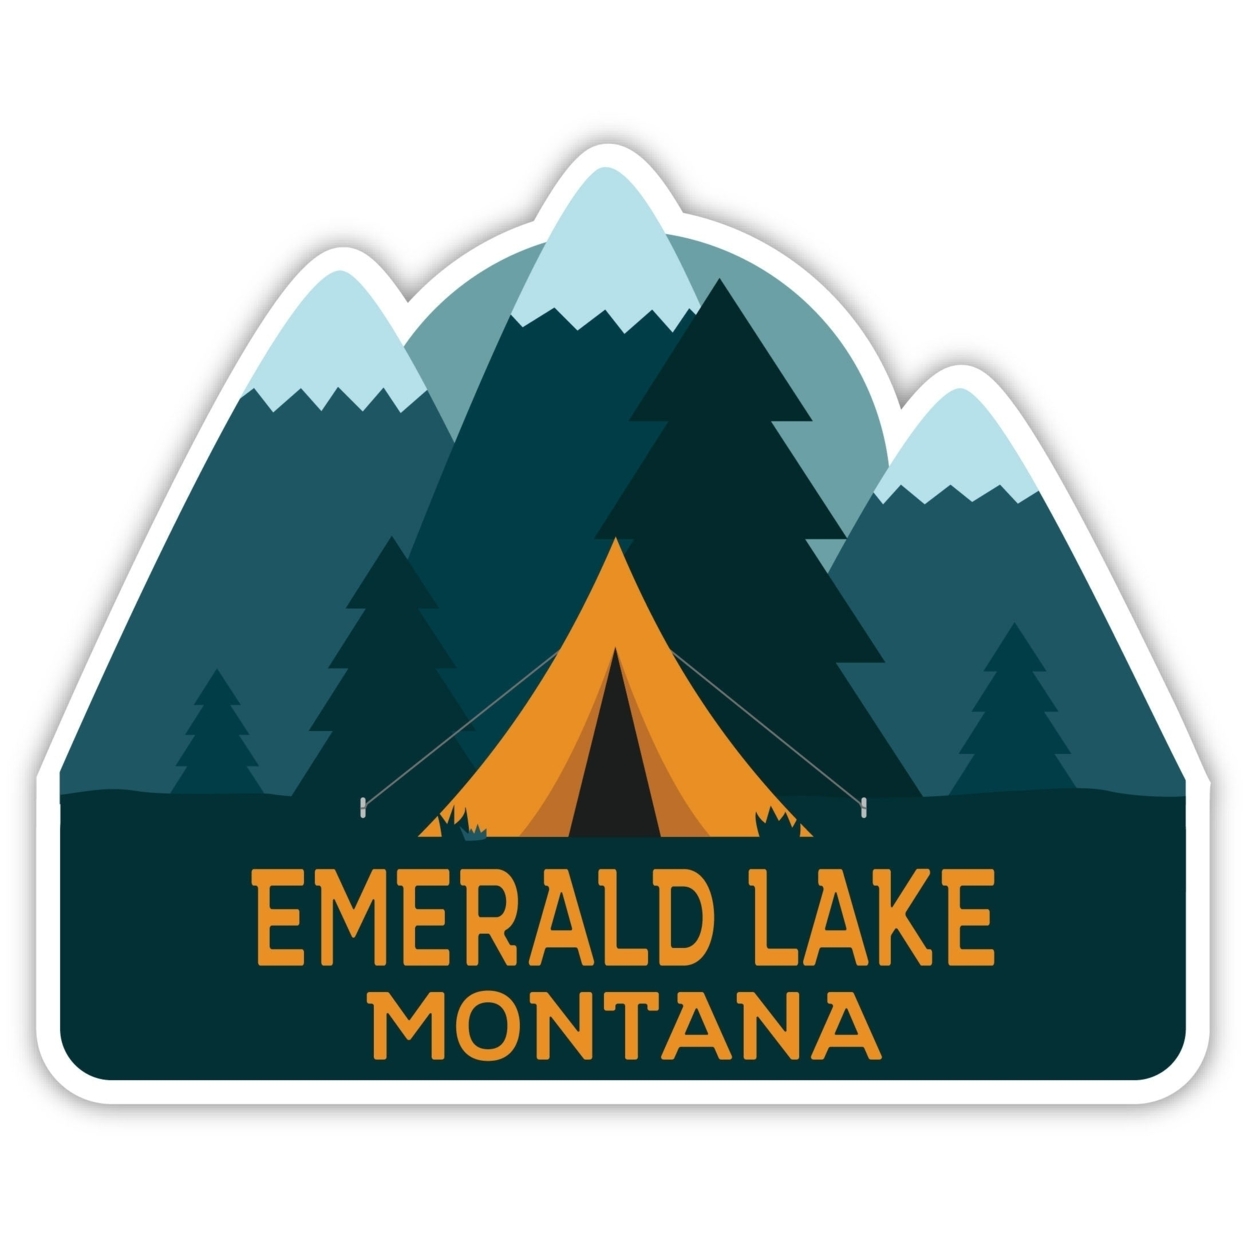 Emerald Lake Montana Souvenir Decorative Stickers (Choose Theme And Size) - 4-Pack, 6-Inch, Tent